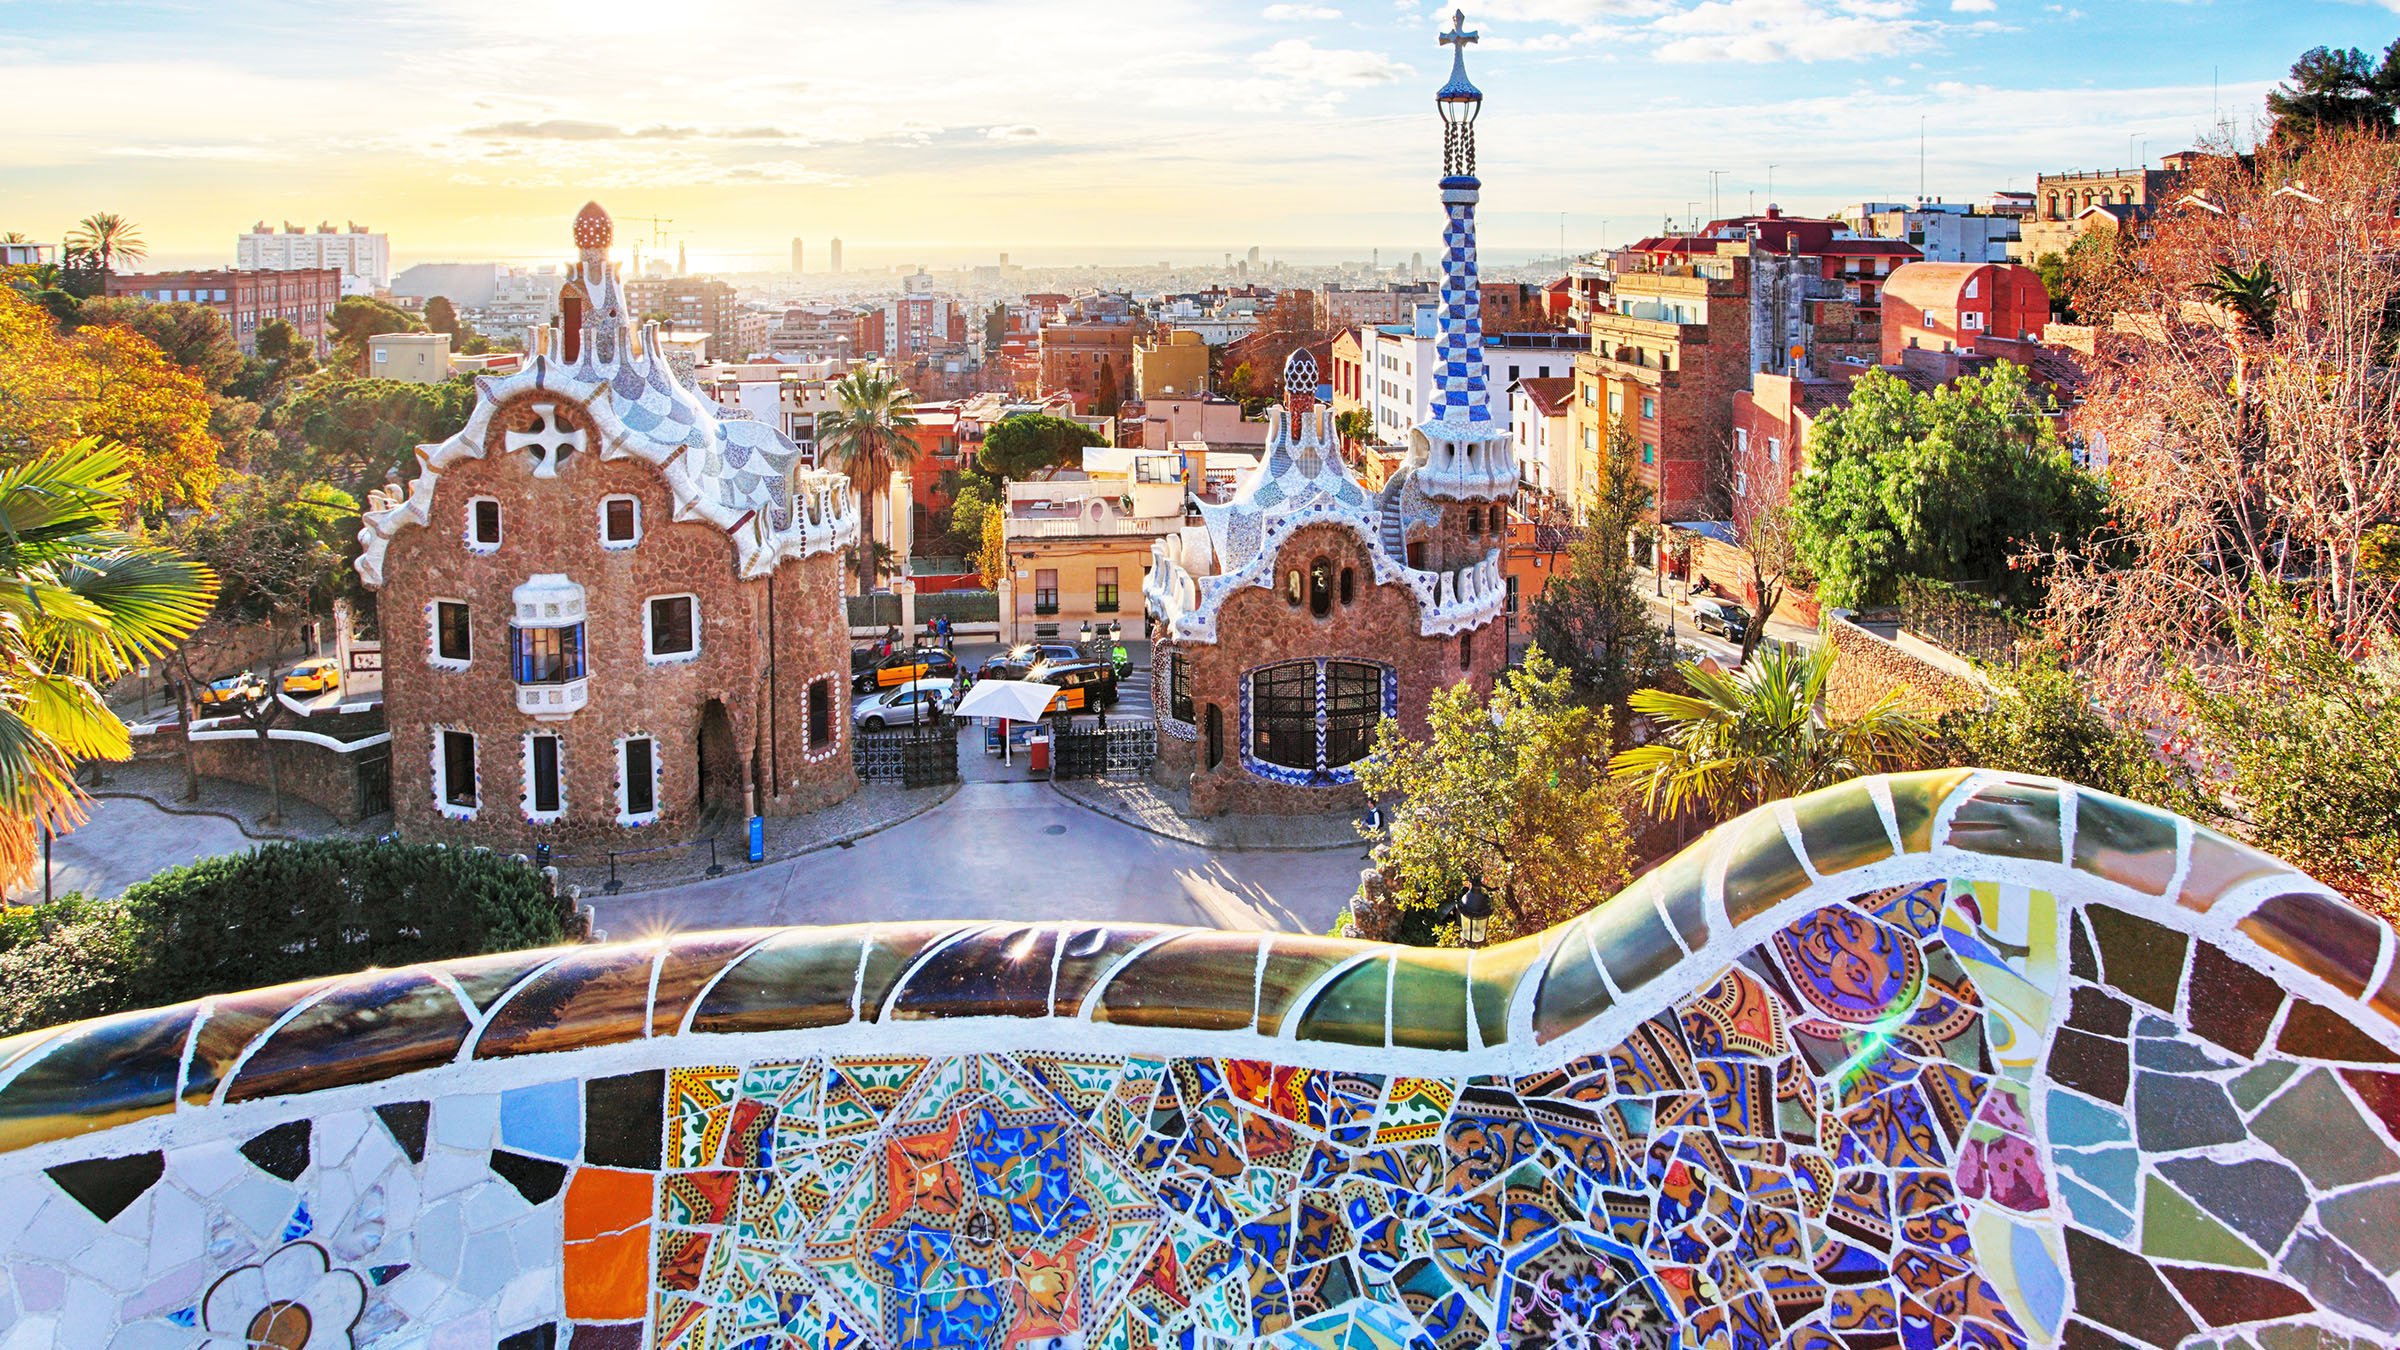 Get 30% Off on Casa Mila Tickets with My Barcelona Pass